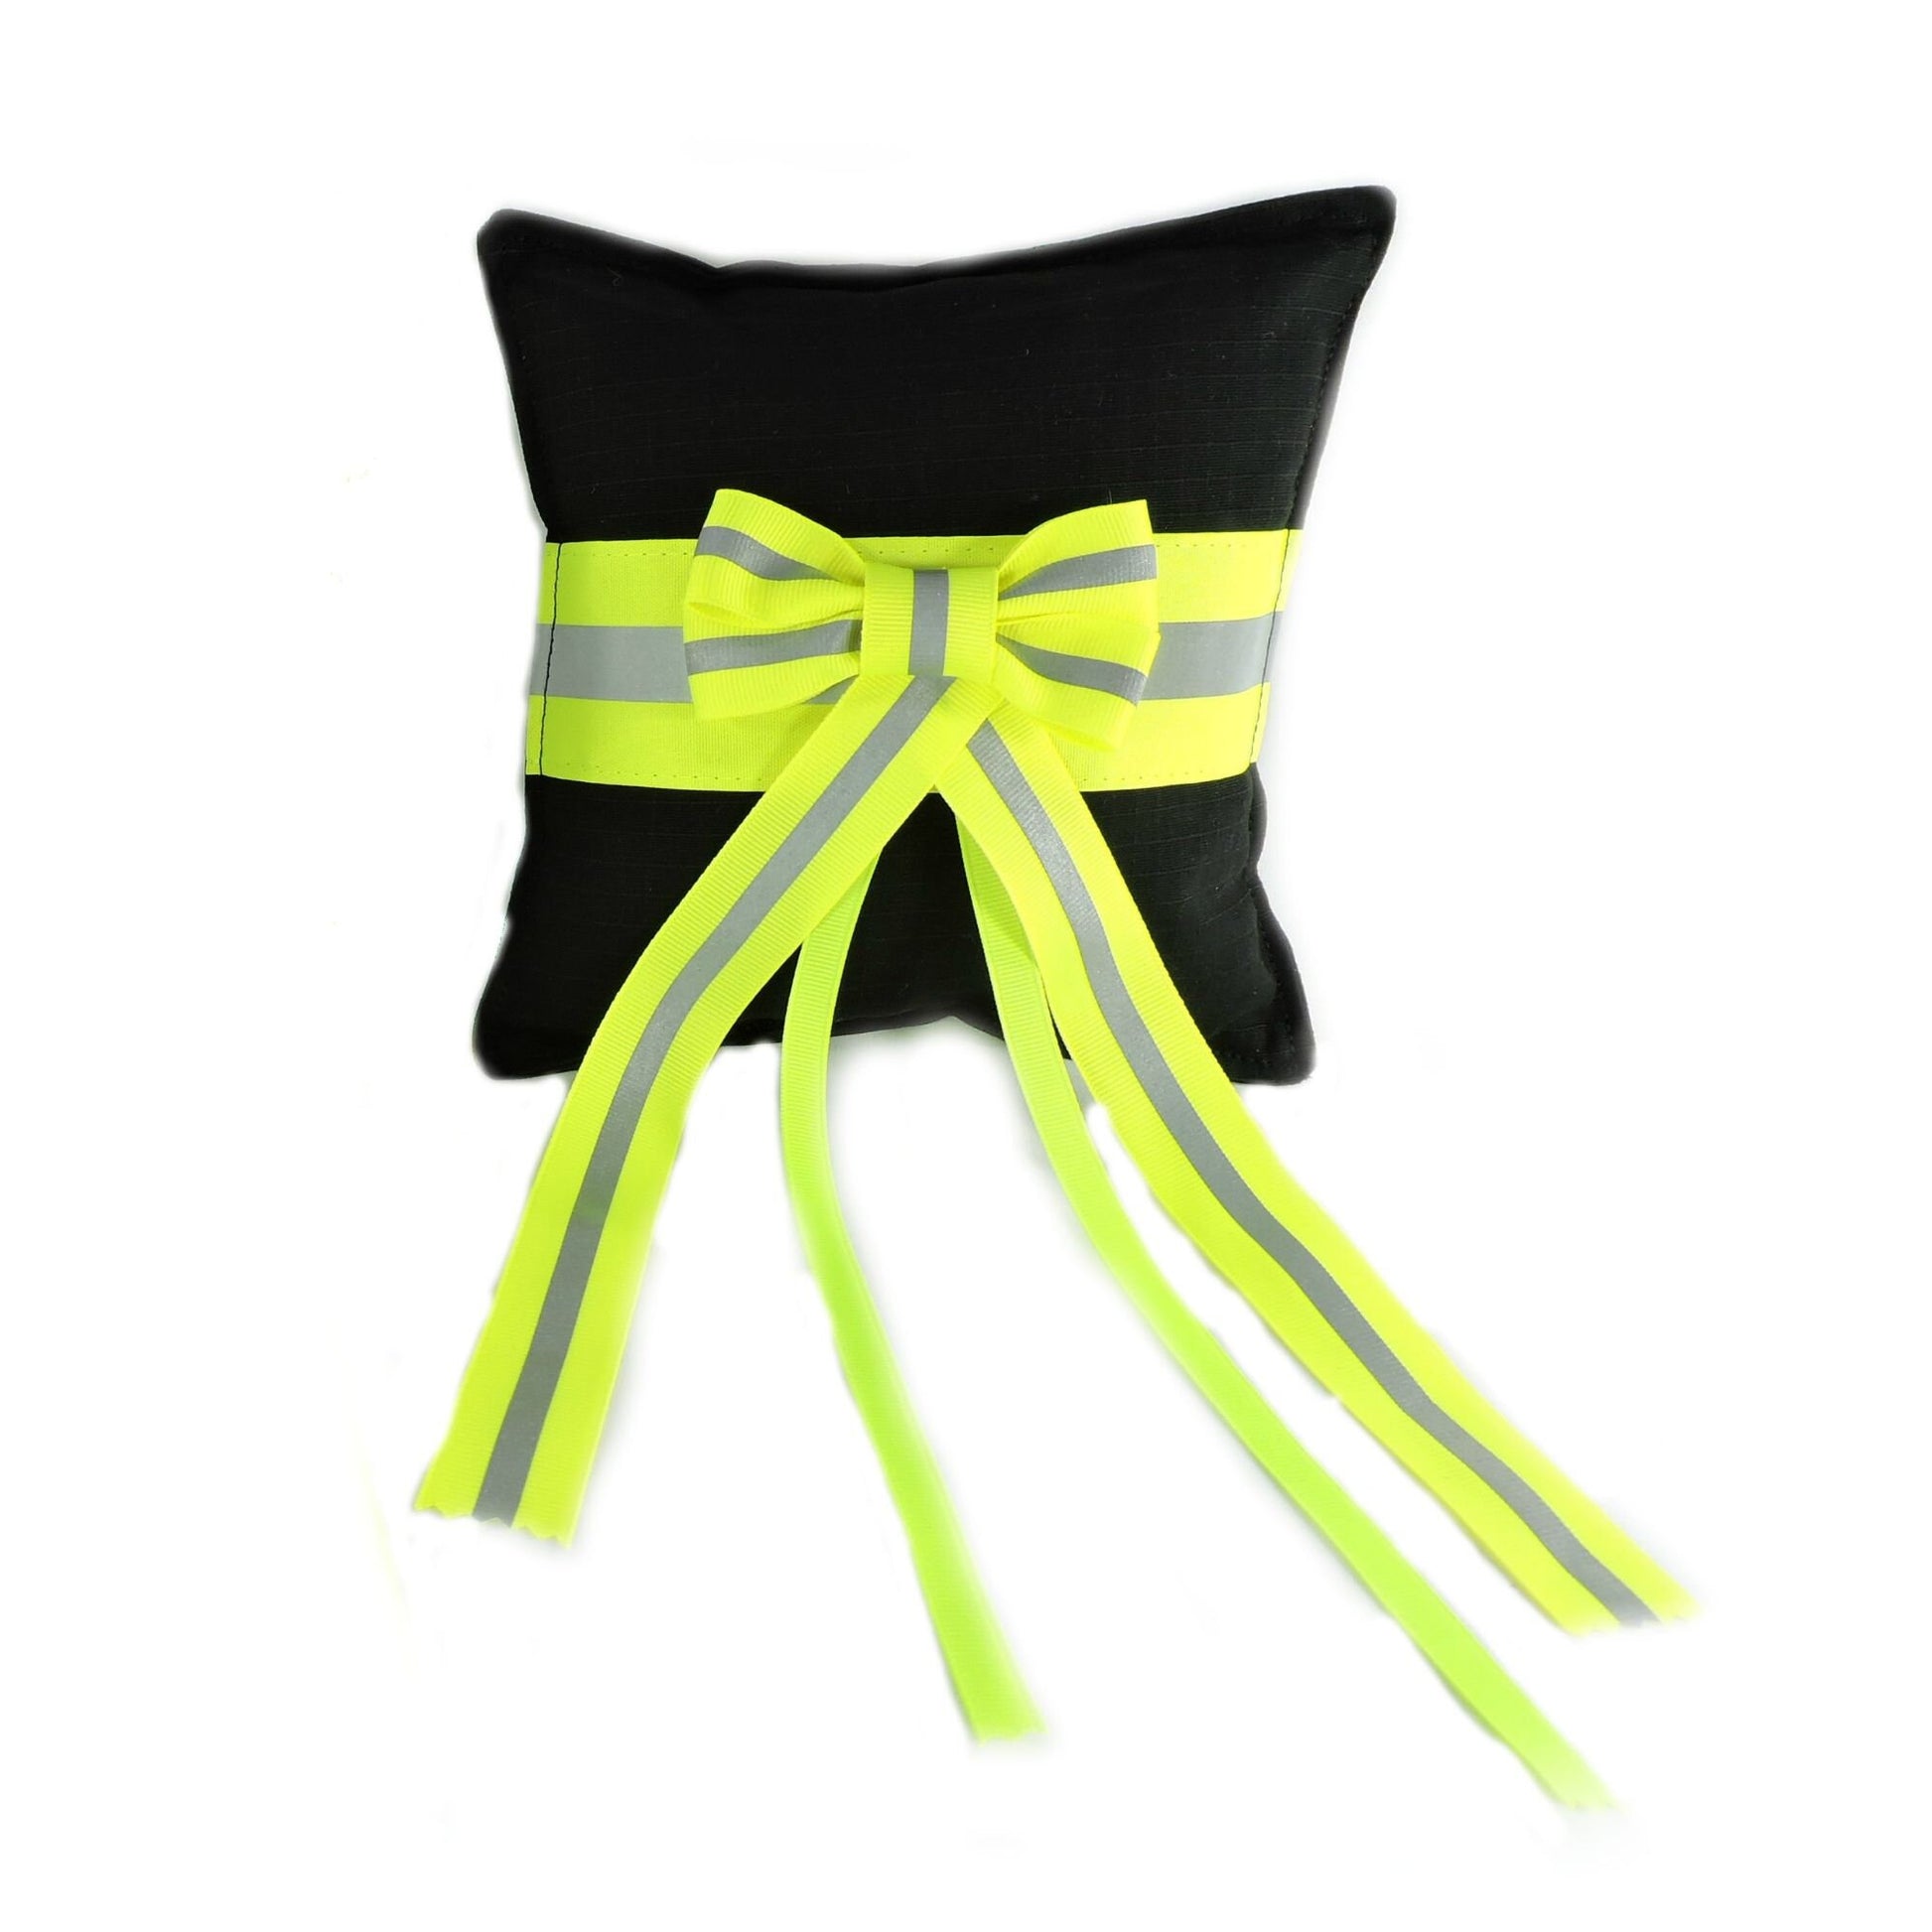 Black Fabric and Neon Yellow Reflective Tape Firefighter wedding Ring Bearer Pillow